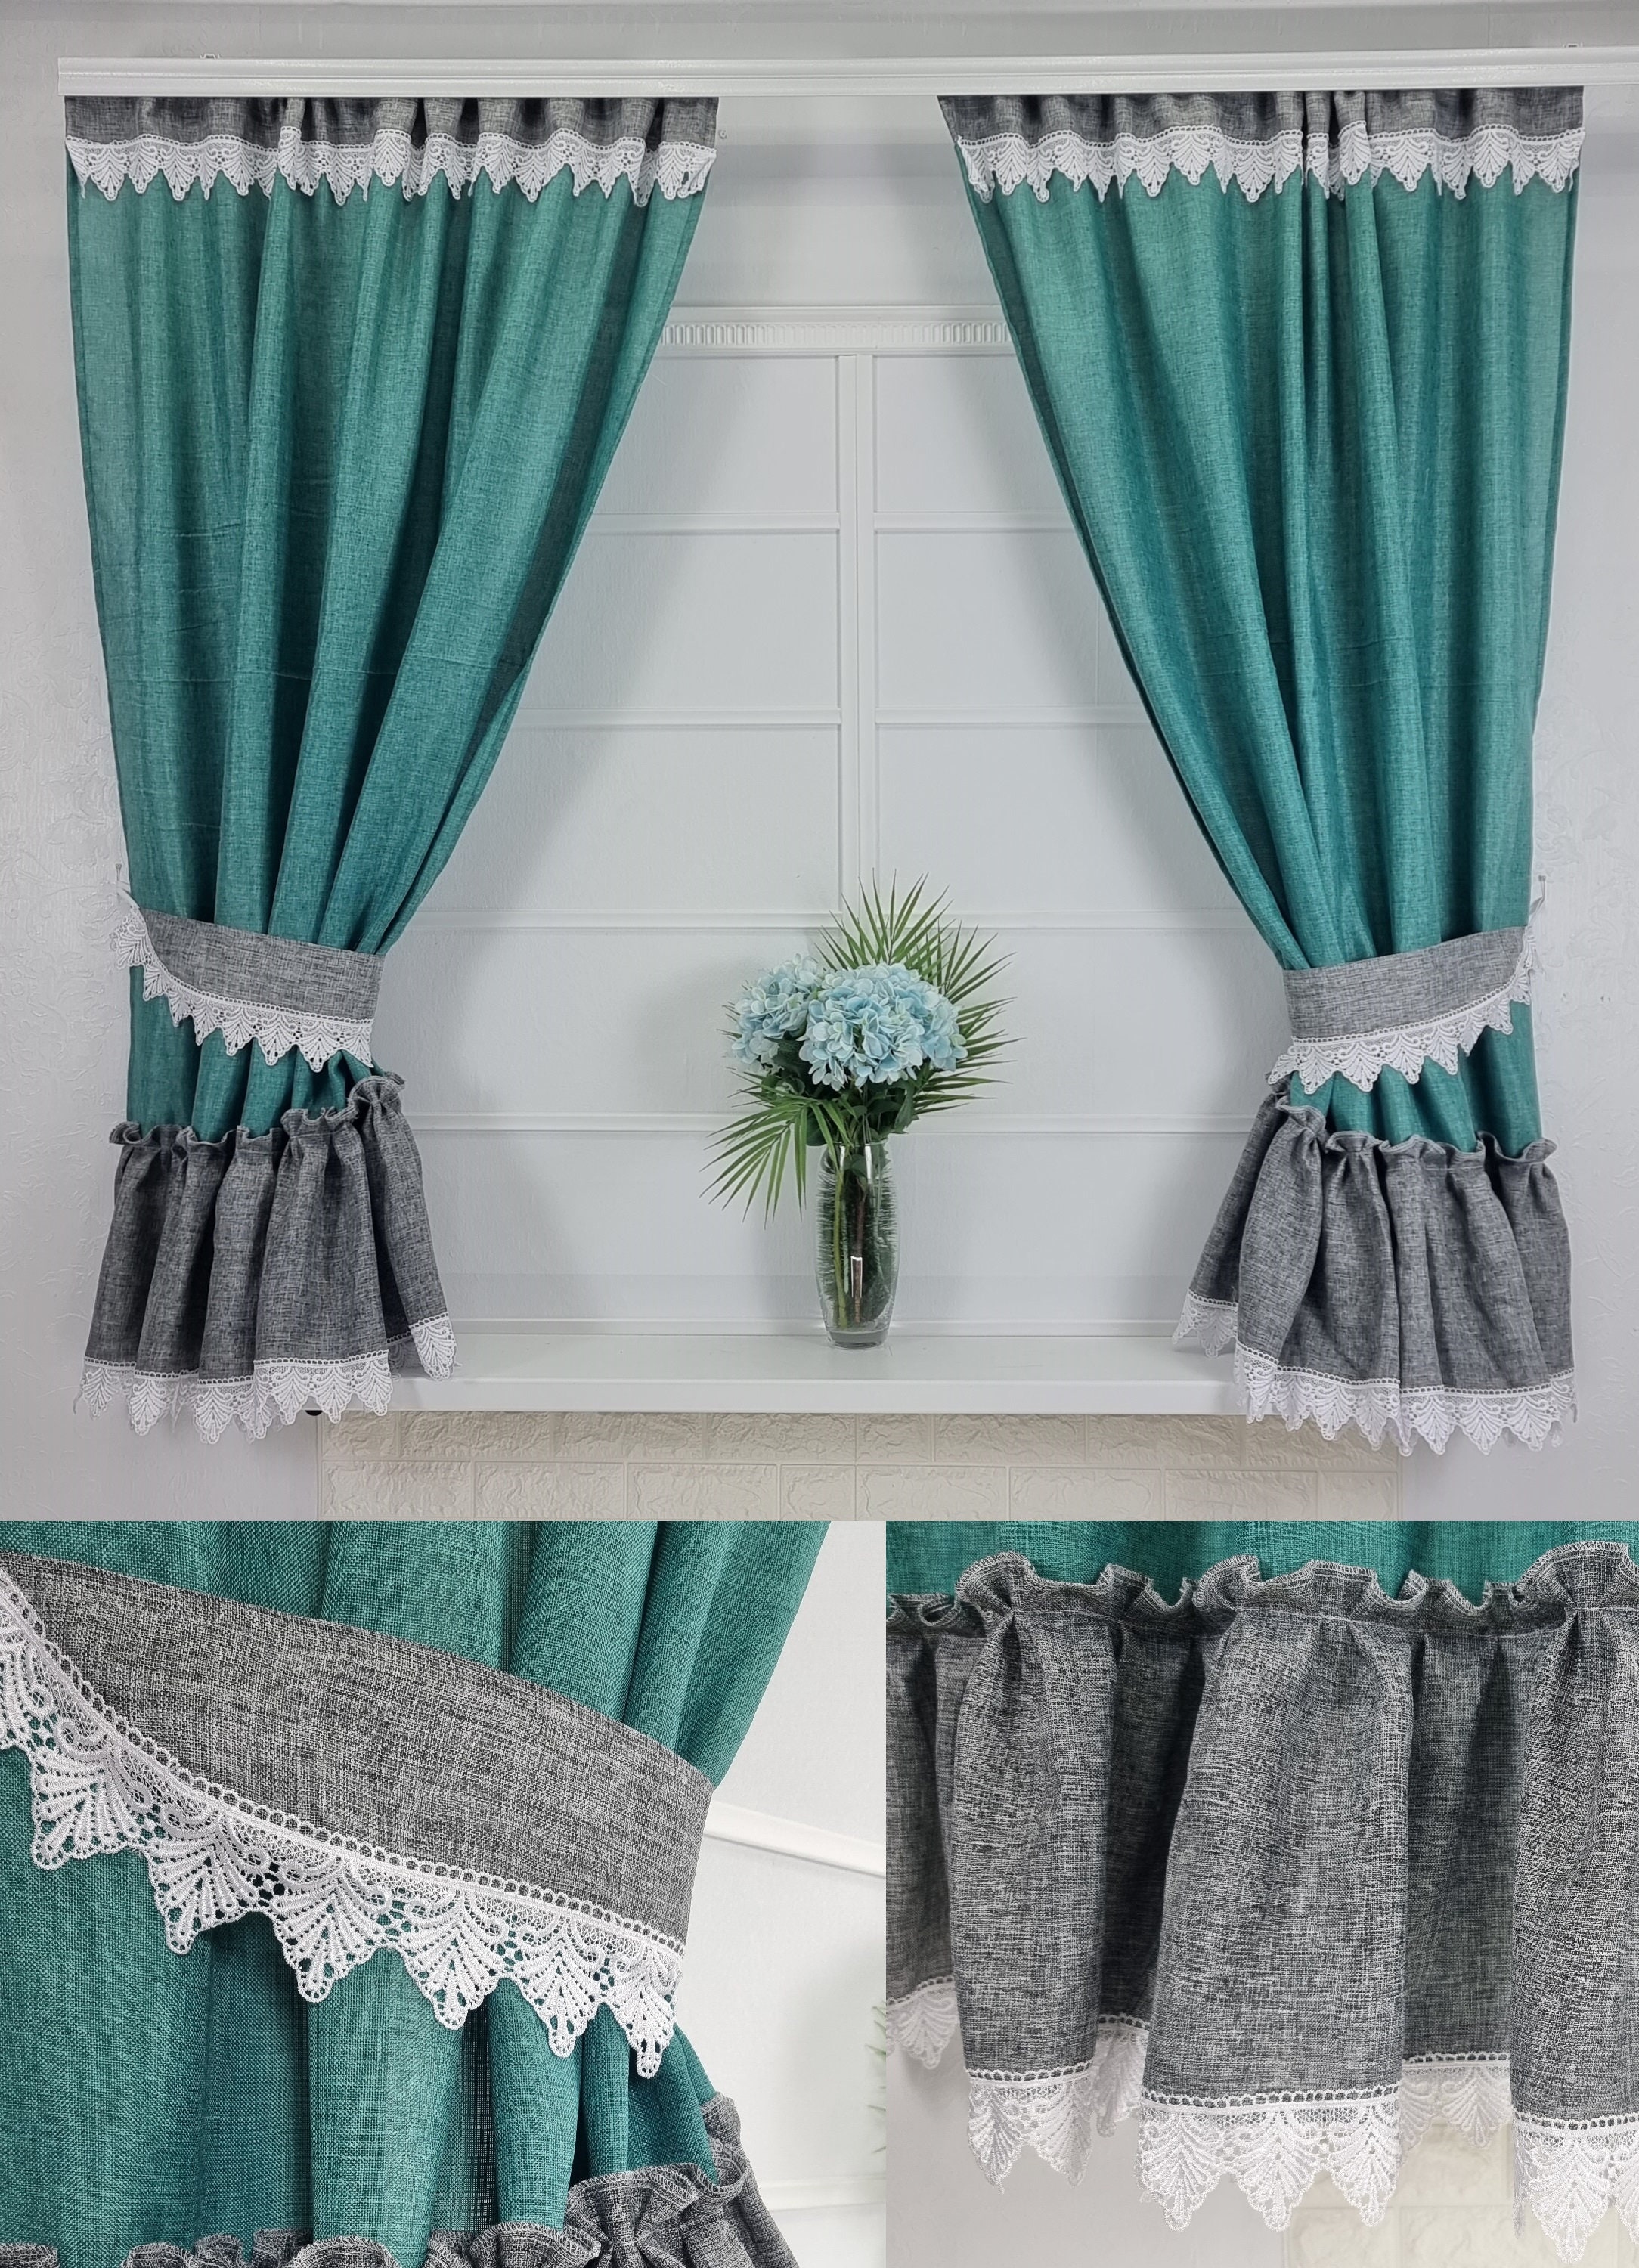 Ruffled Kitchen Curtain Lace Curtain For Small Windows Voile Window Drapes BB 